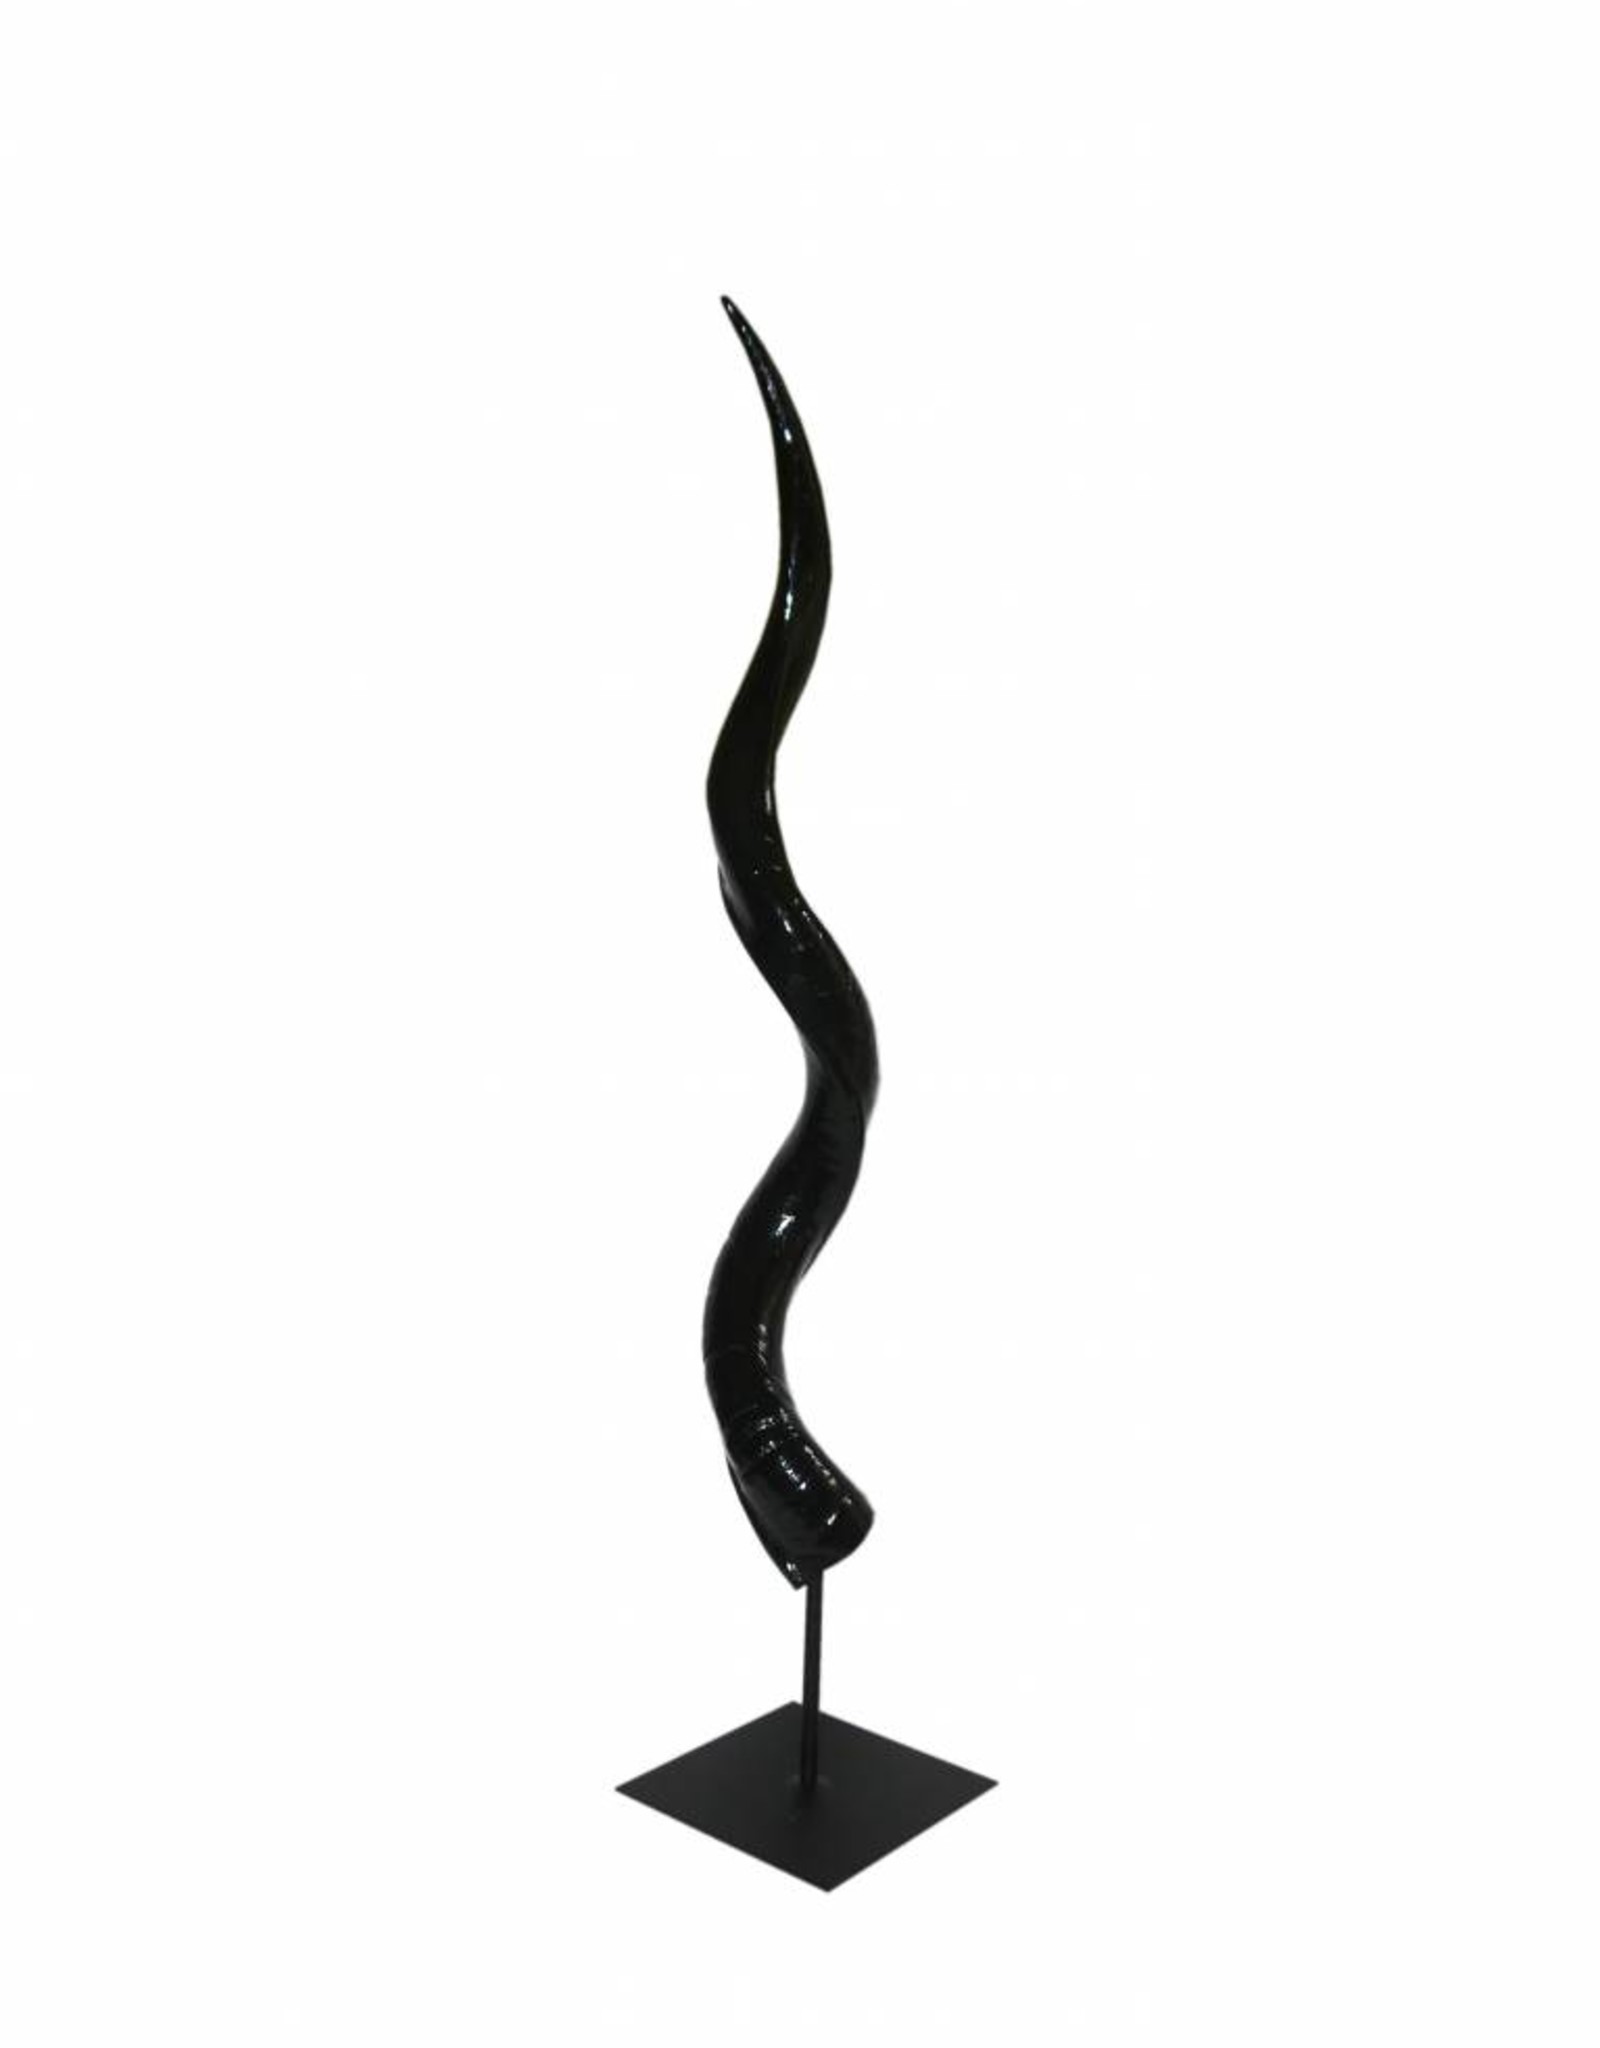 Partially ground black lacquered kudu horn on a metal stand